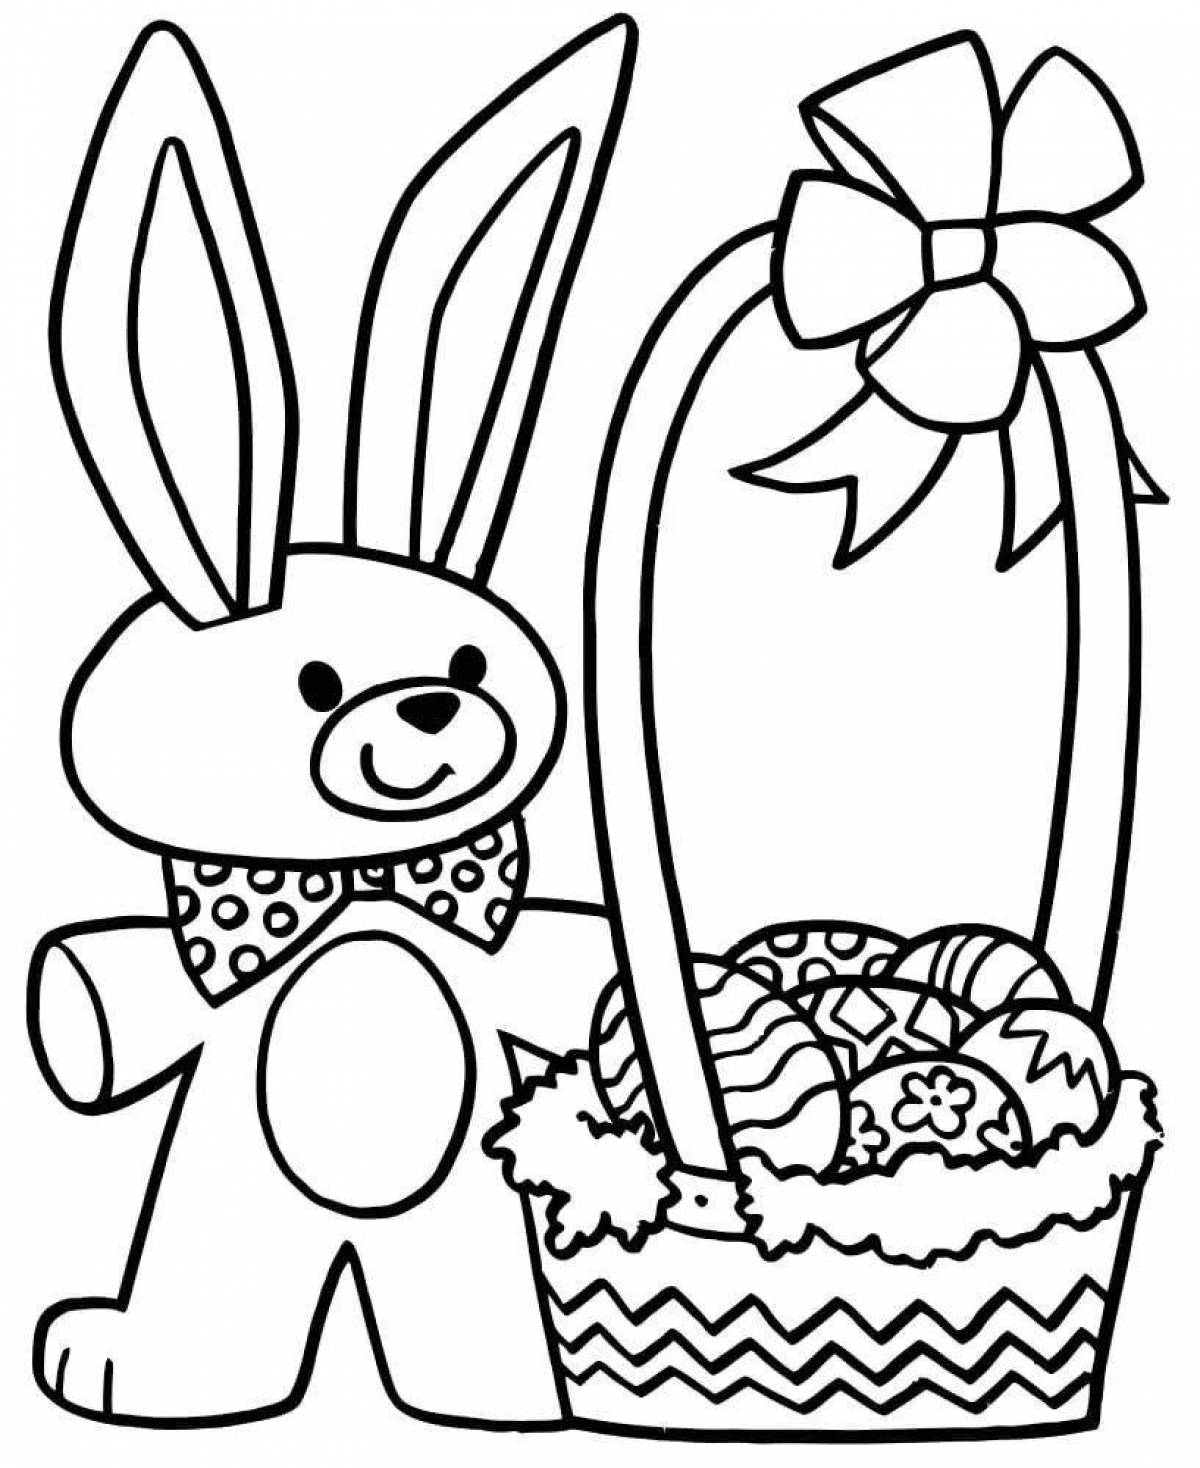 Shiny Easter coloring book